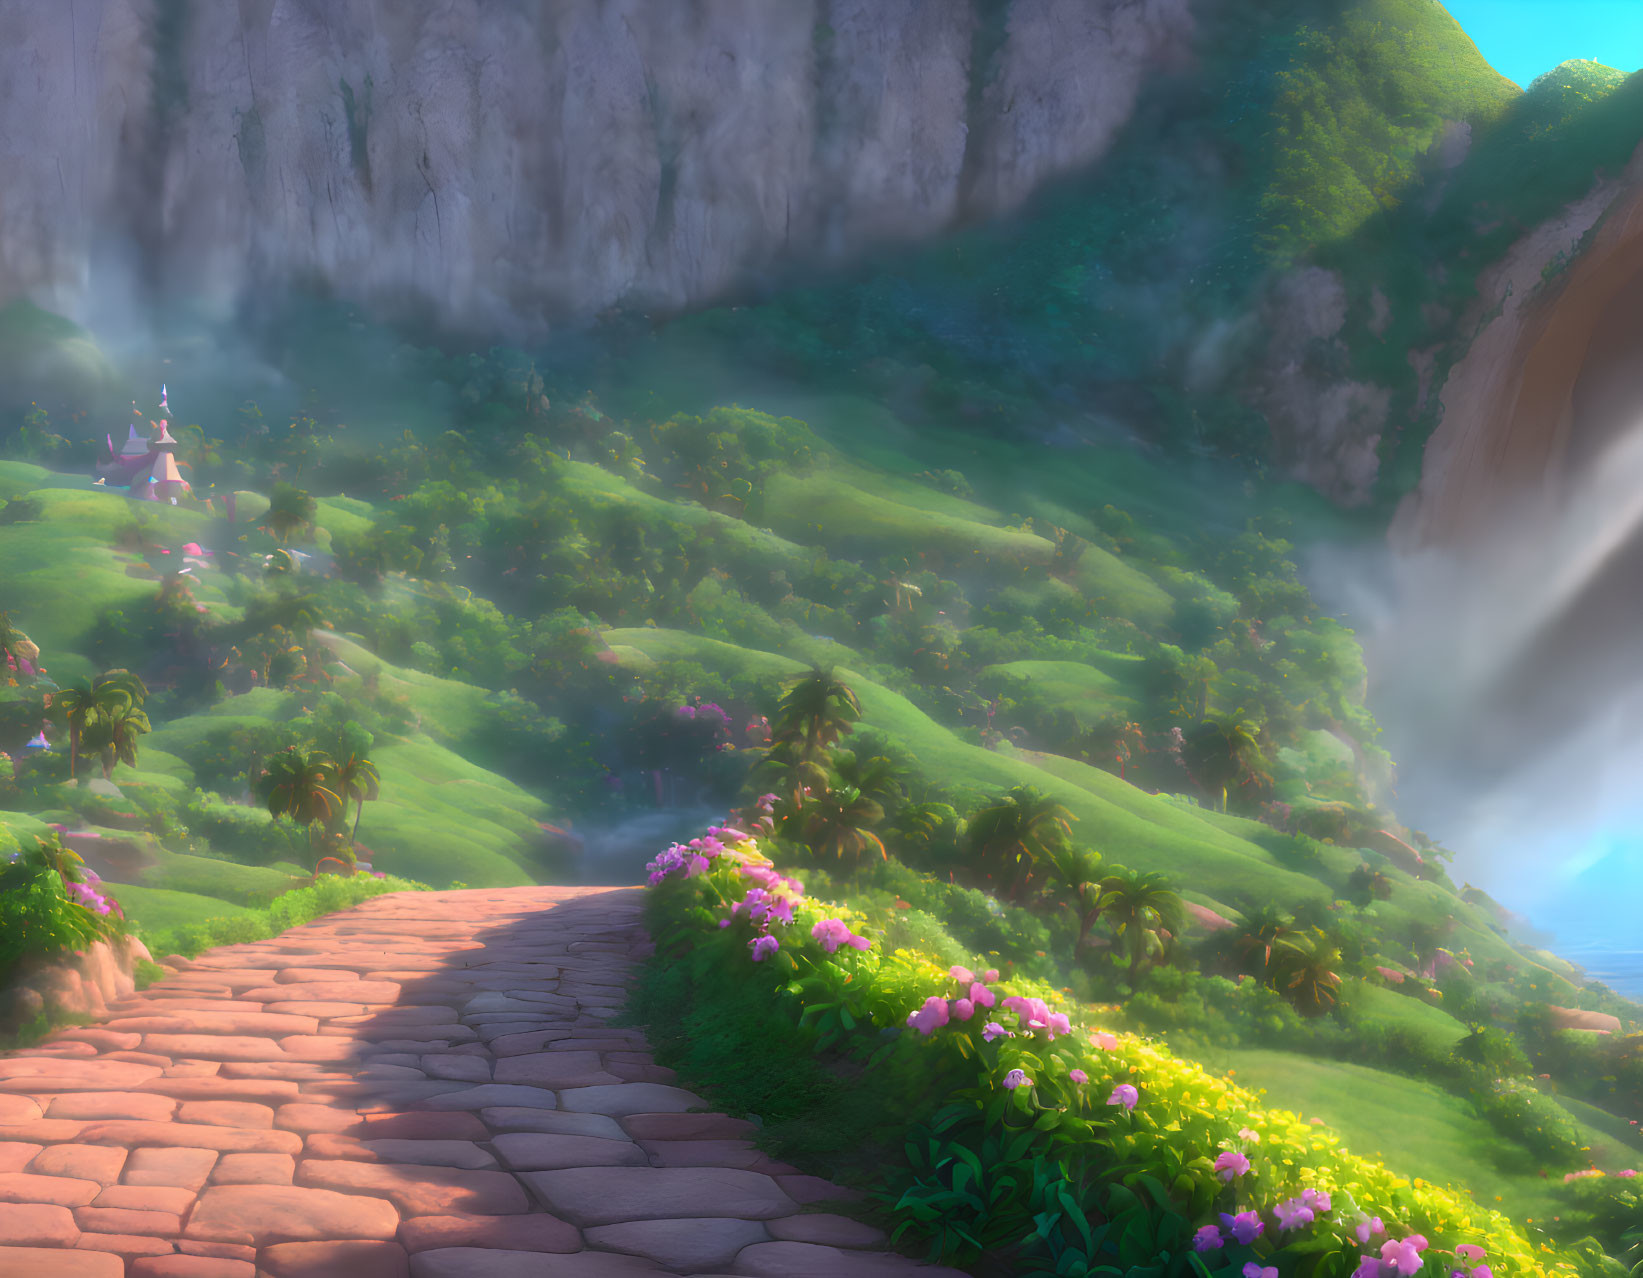 Scenic cobblestone path in lush valley with waterfall, flowers, and distant castle